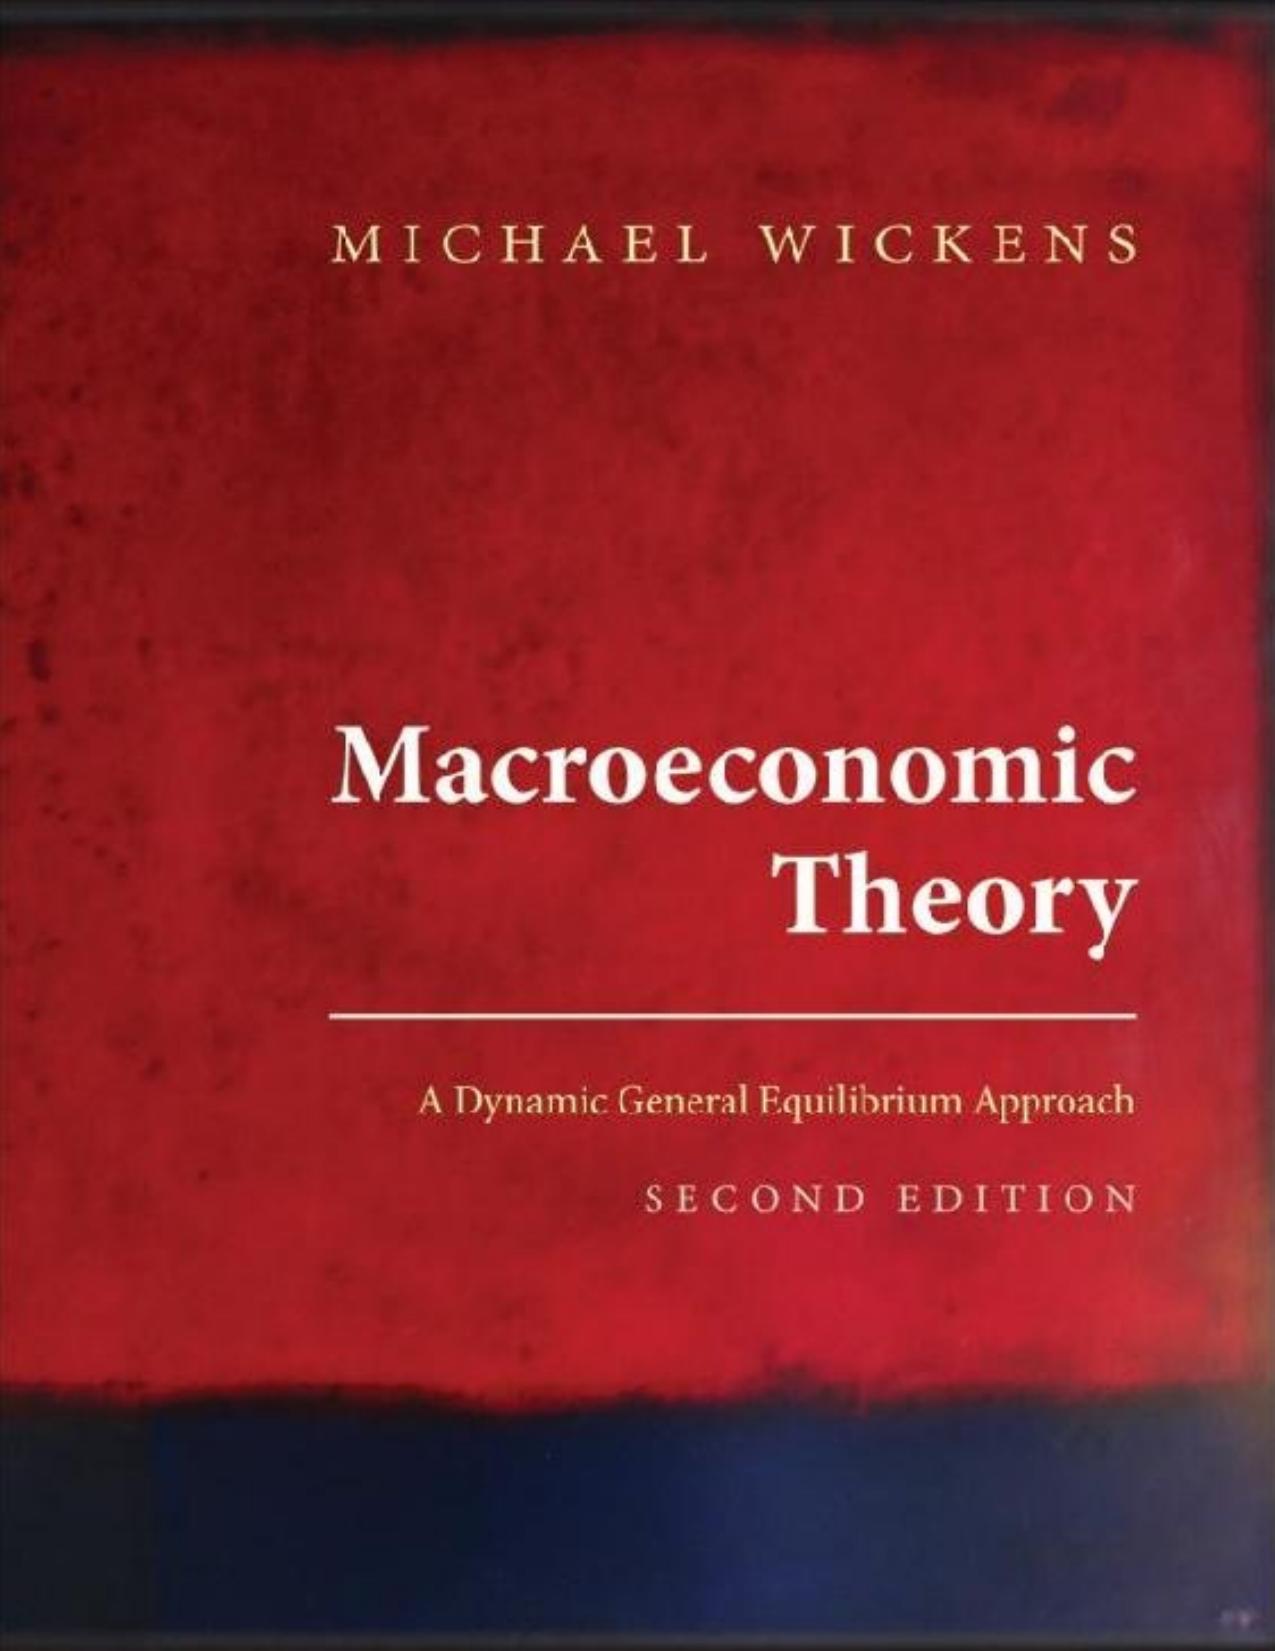 Macroeconomic Theory: A Dynamic General Equilibrium Approach